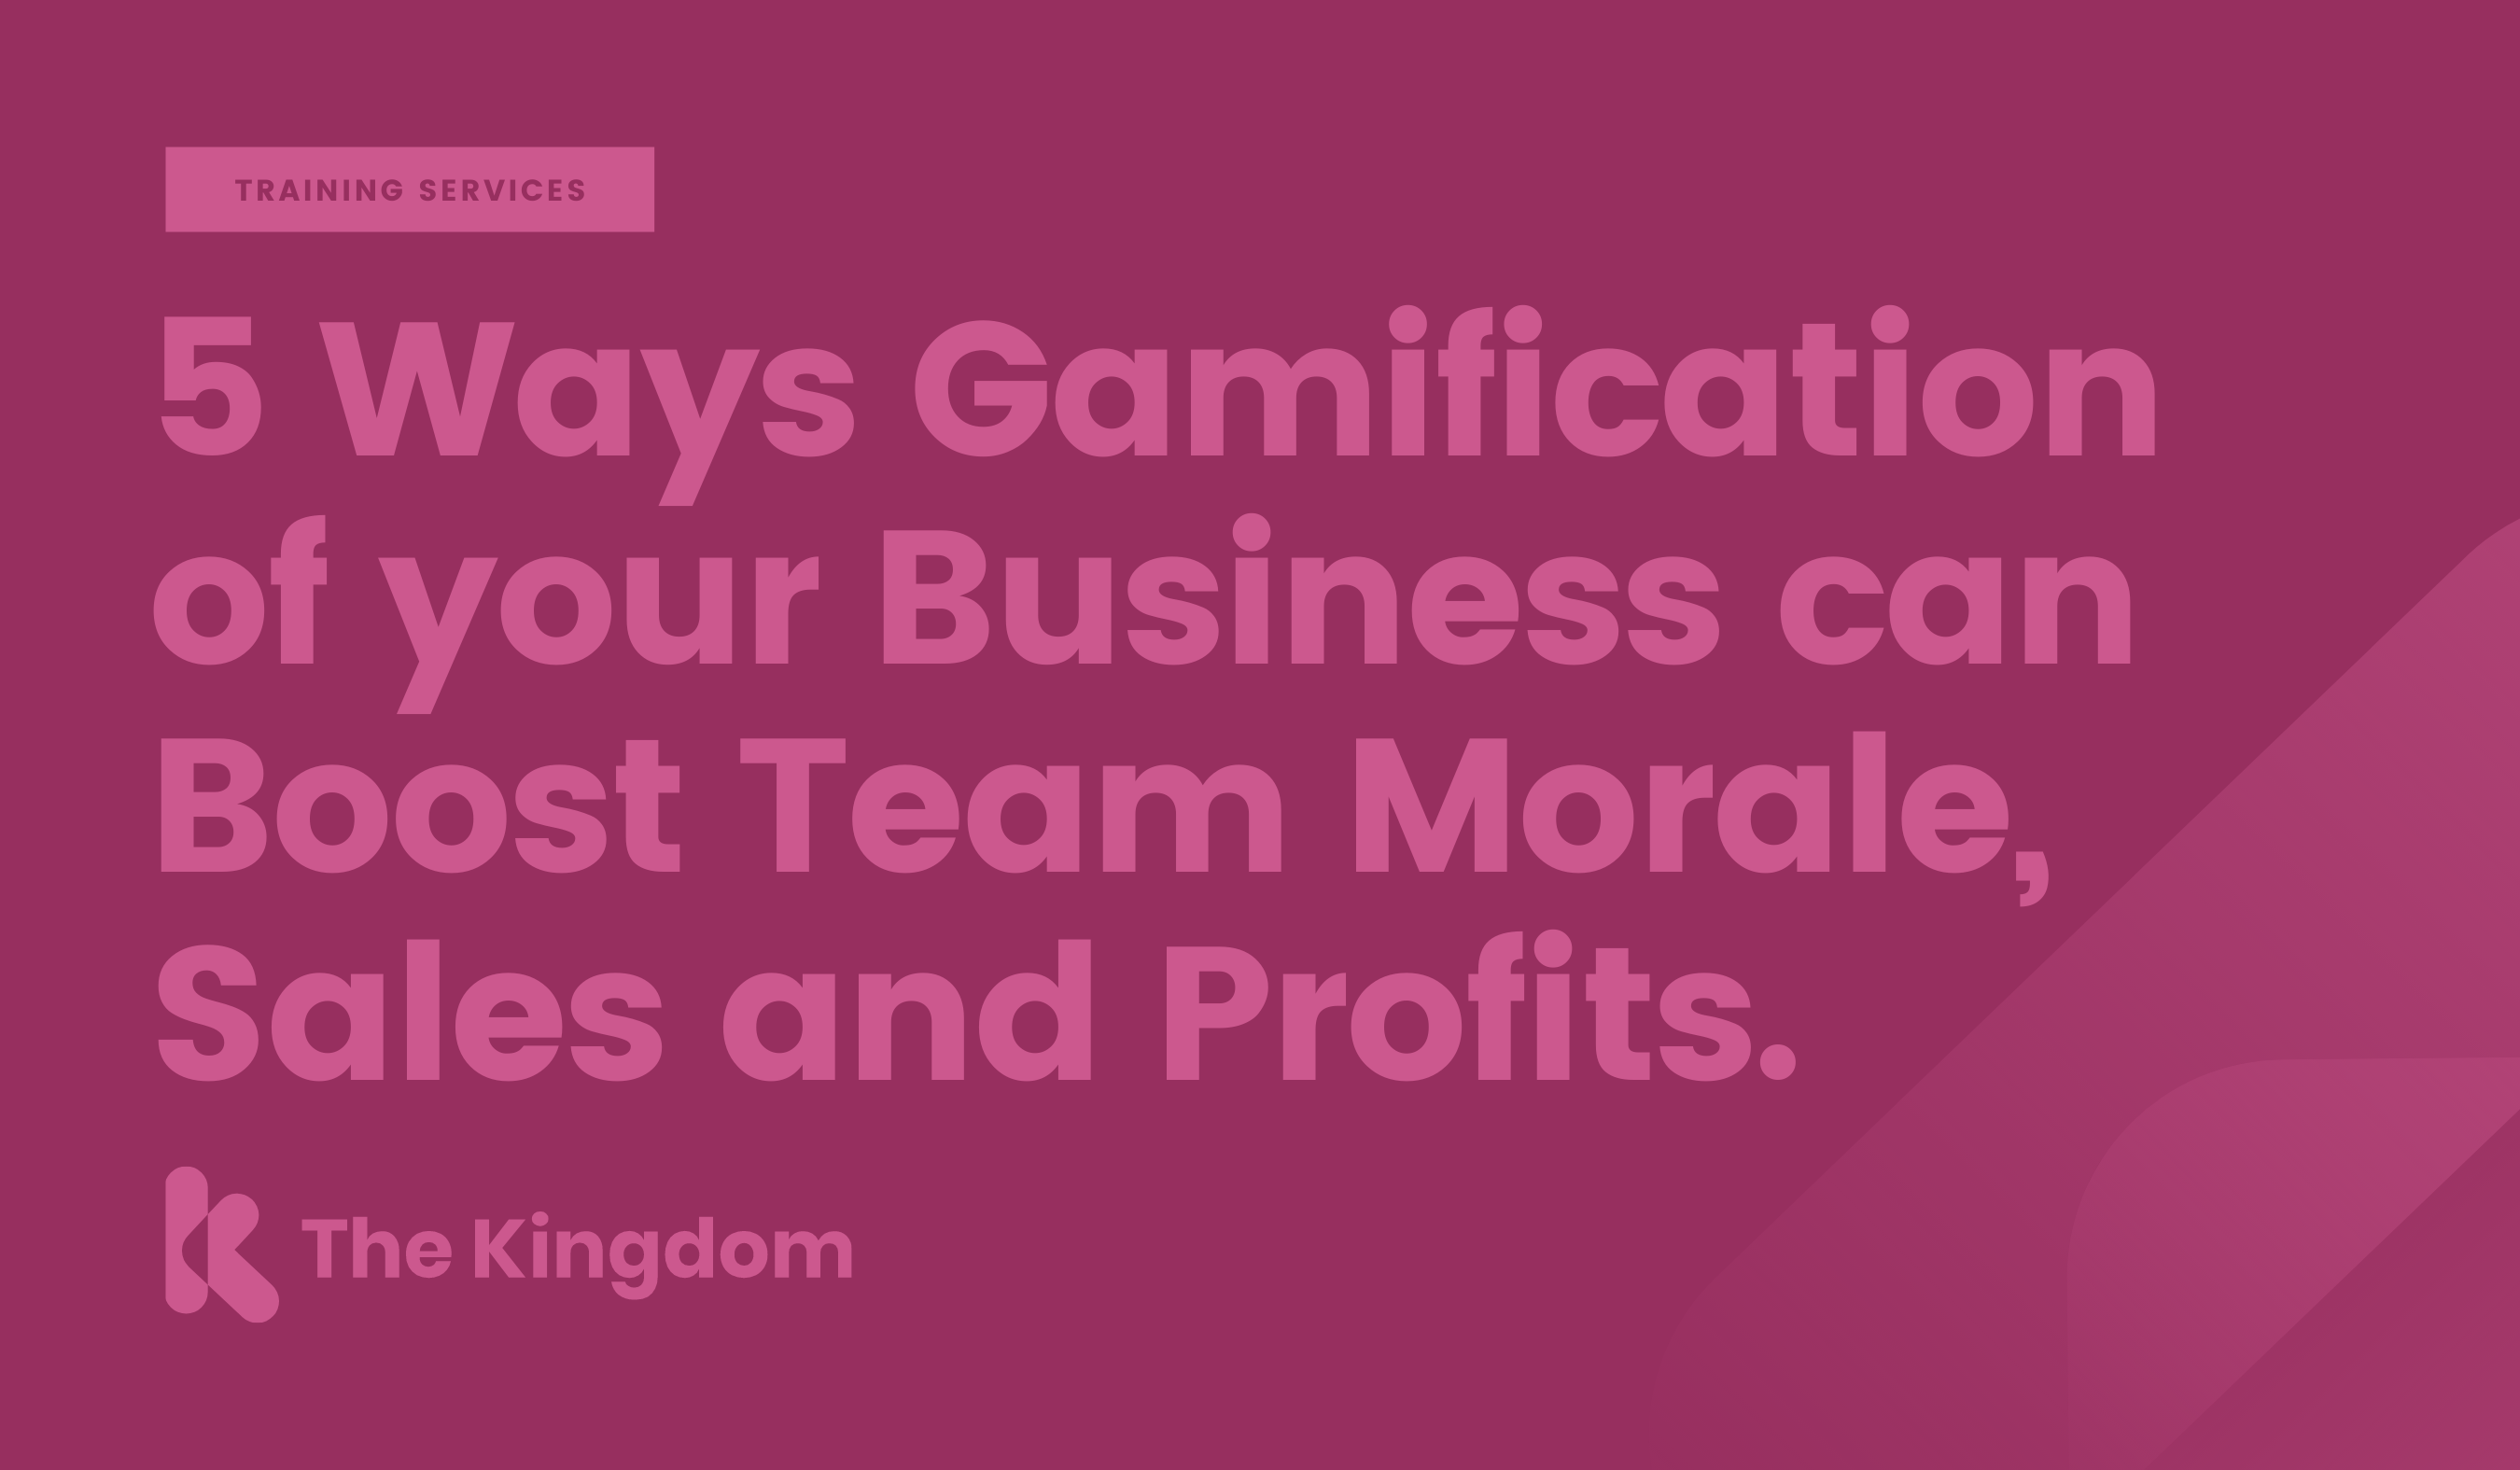 5 Ways Gamification of your Business can Boost Team Morale, Sales and Profits.